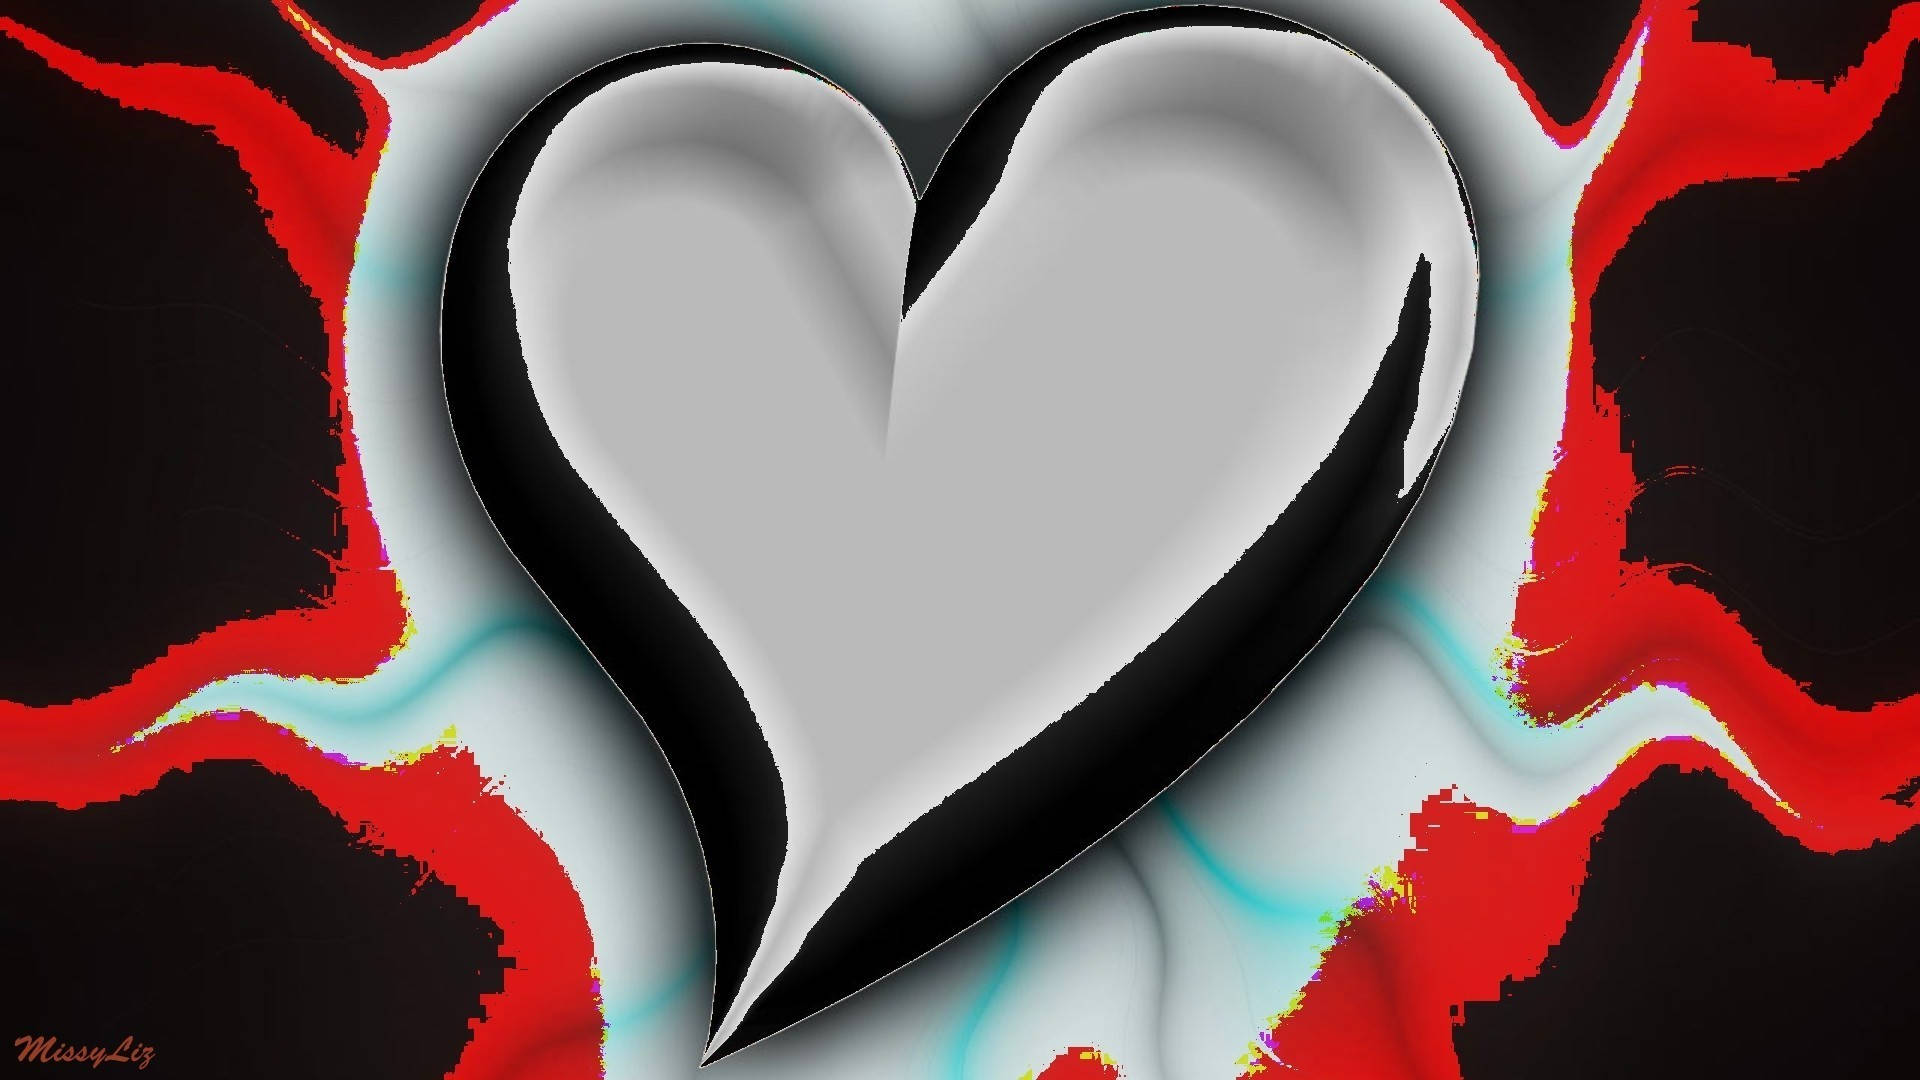 White And Red Heartbeat Artwork Background